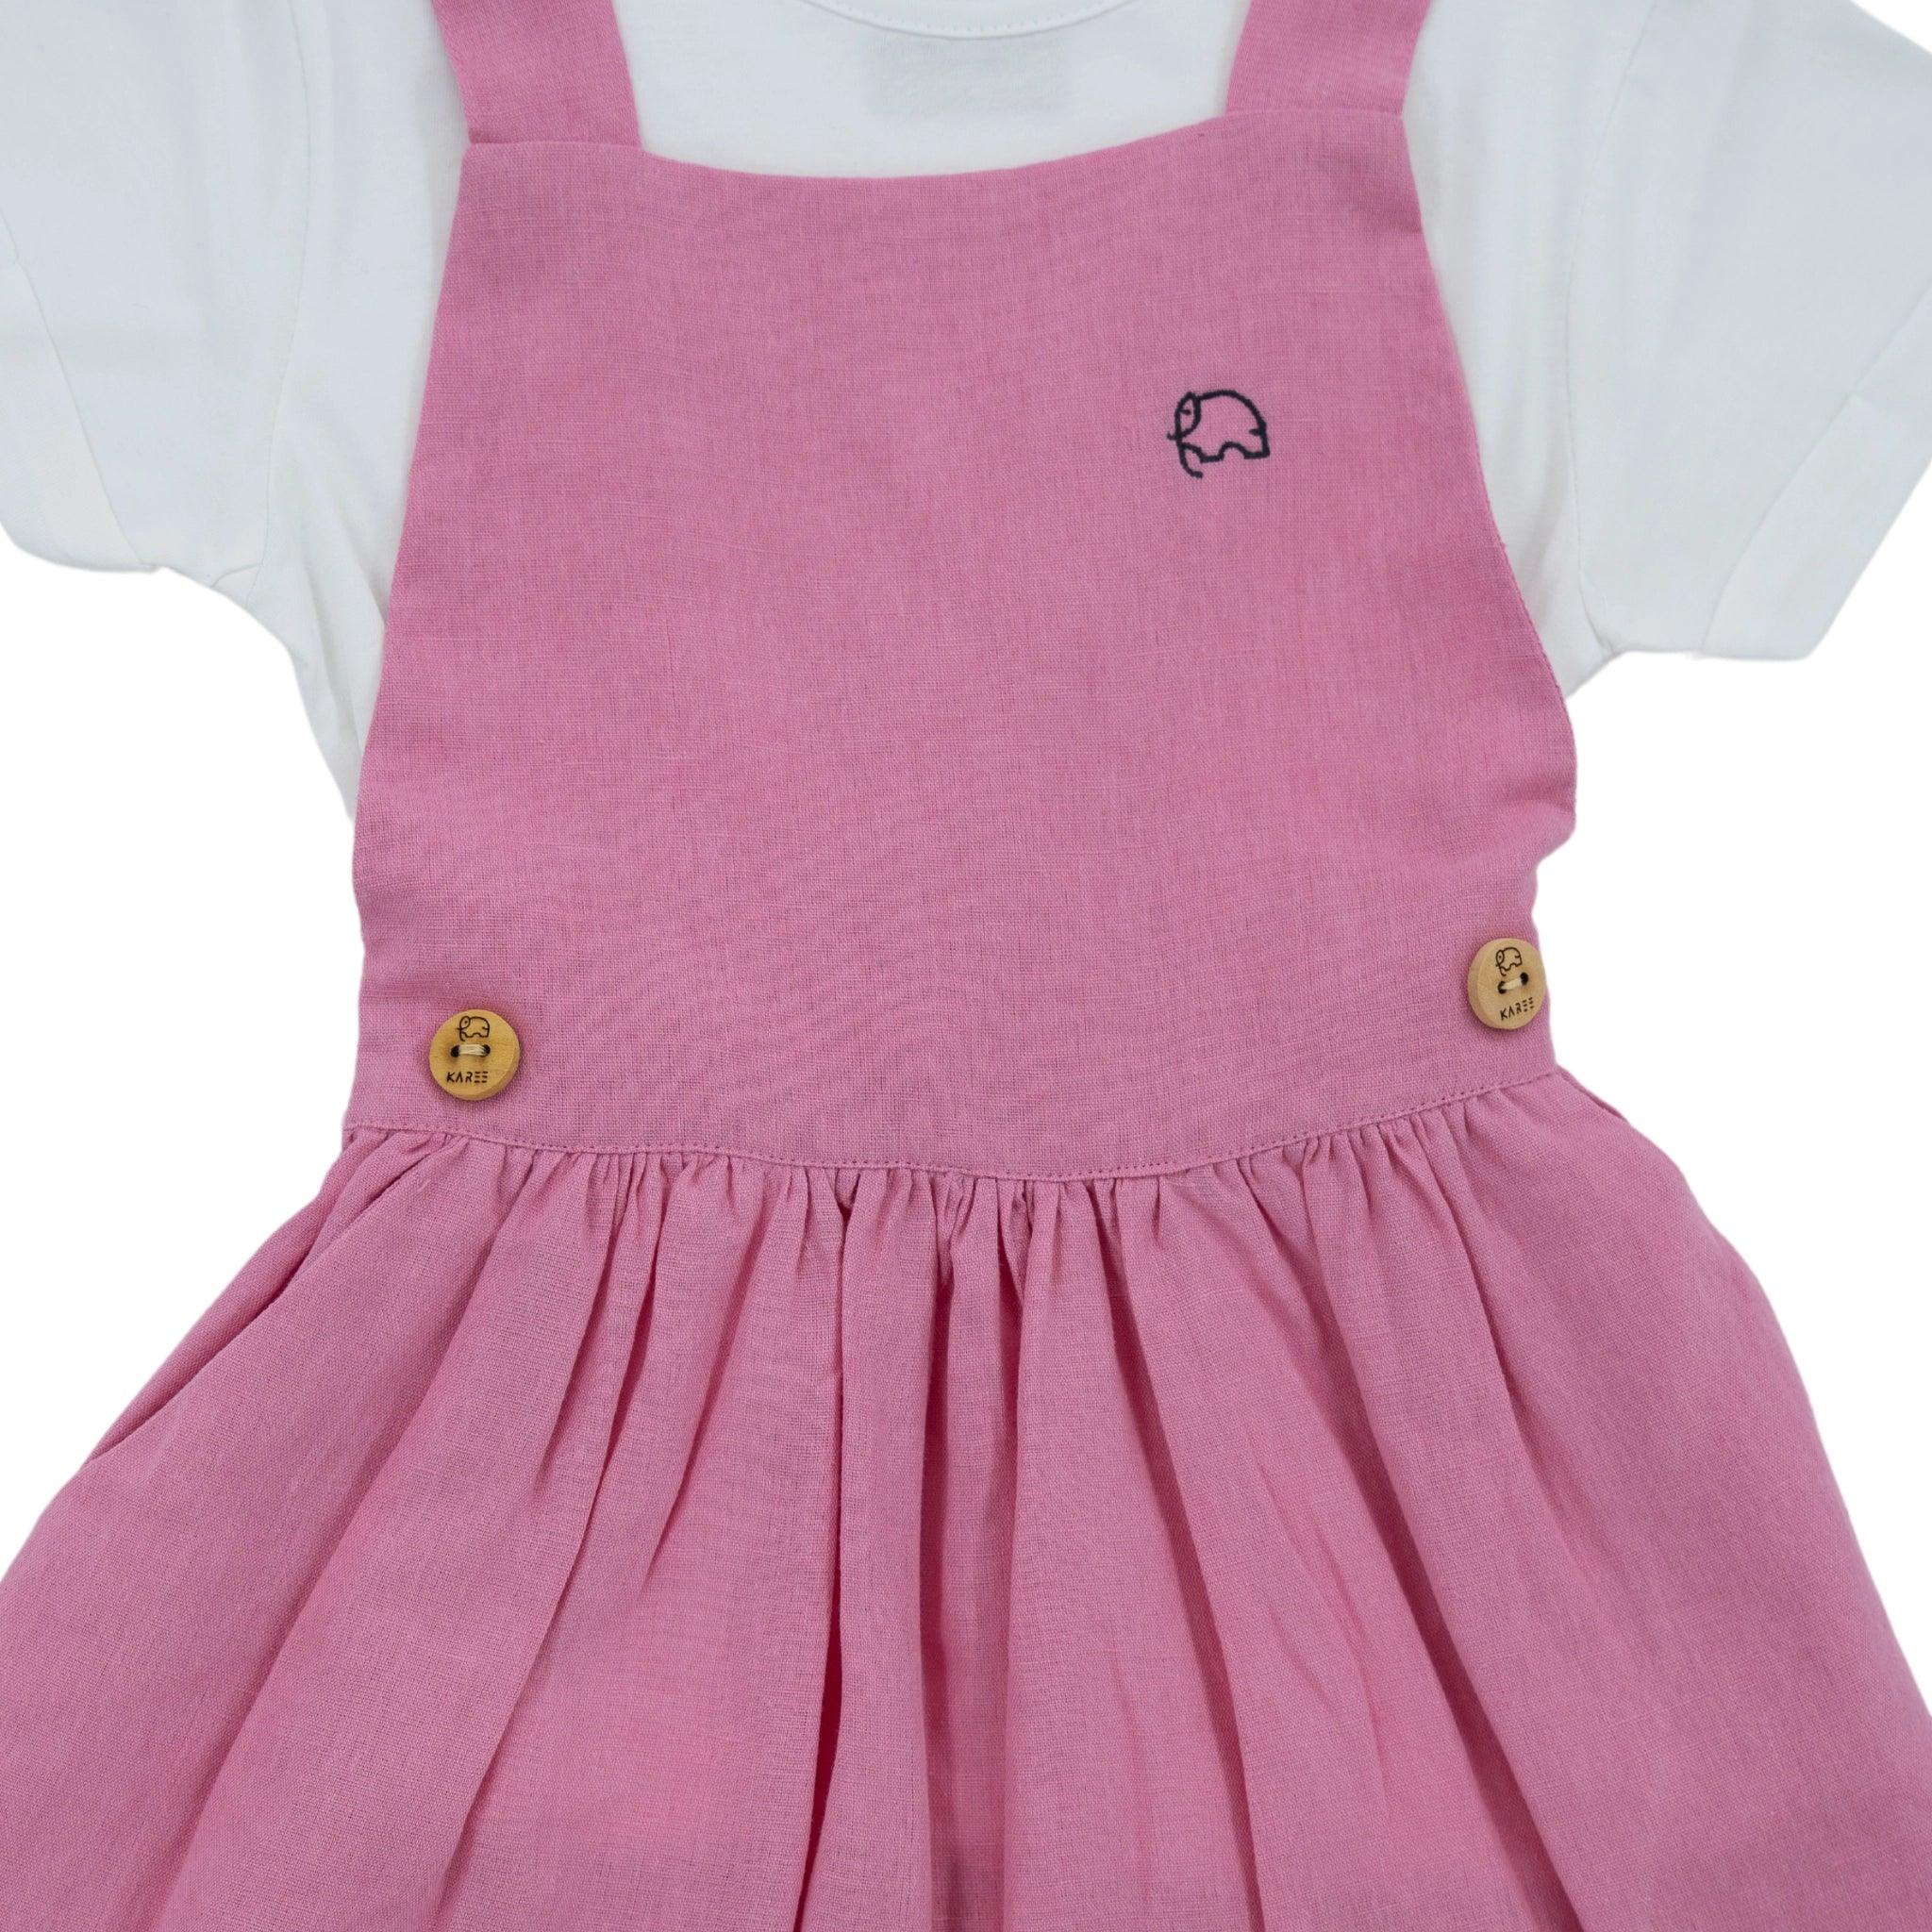 Karee Cashmere Rose Linen Pinafore dress with white shirt, featuring embroidered car on the bib and wooden buttons.